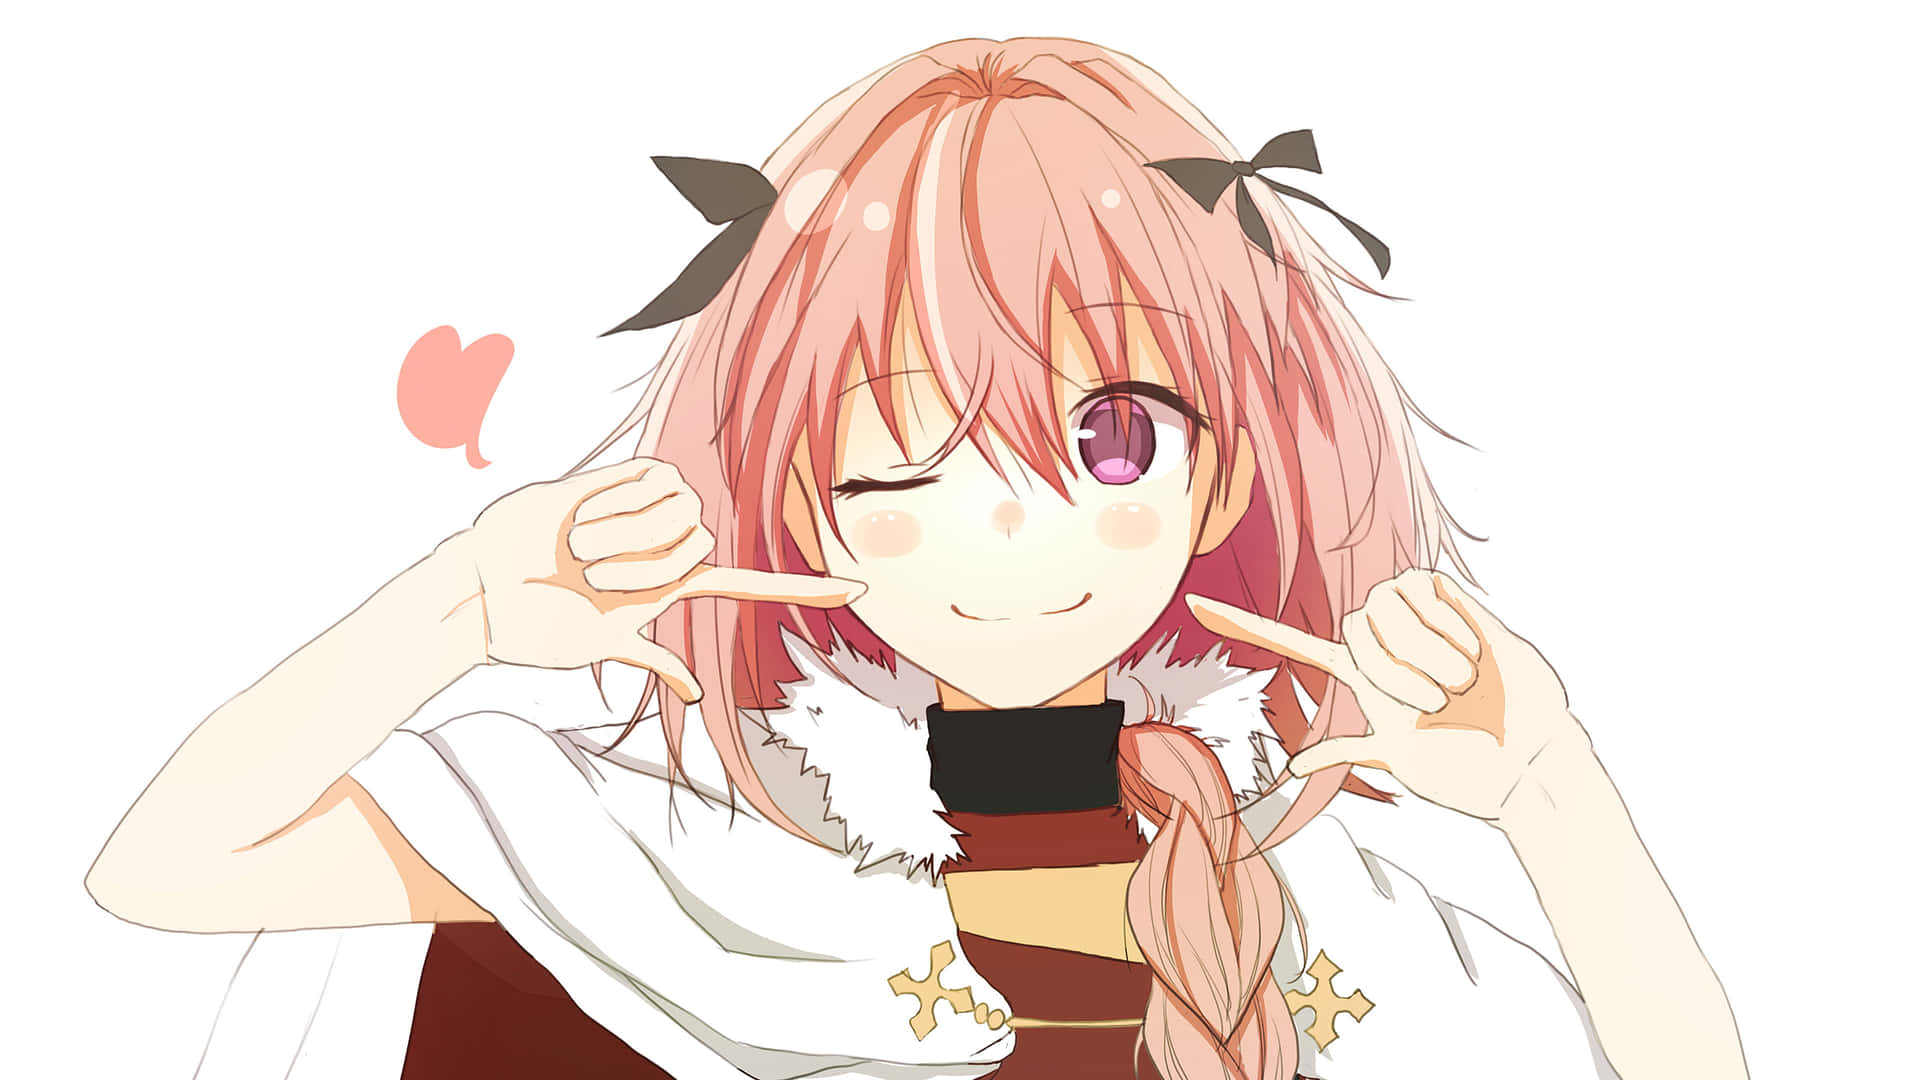 The Handsome and Chivalrous Knight, Astolfo